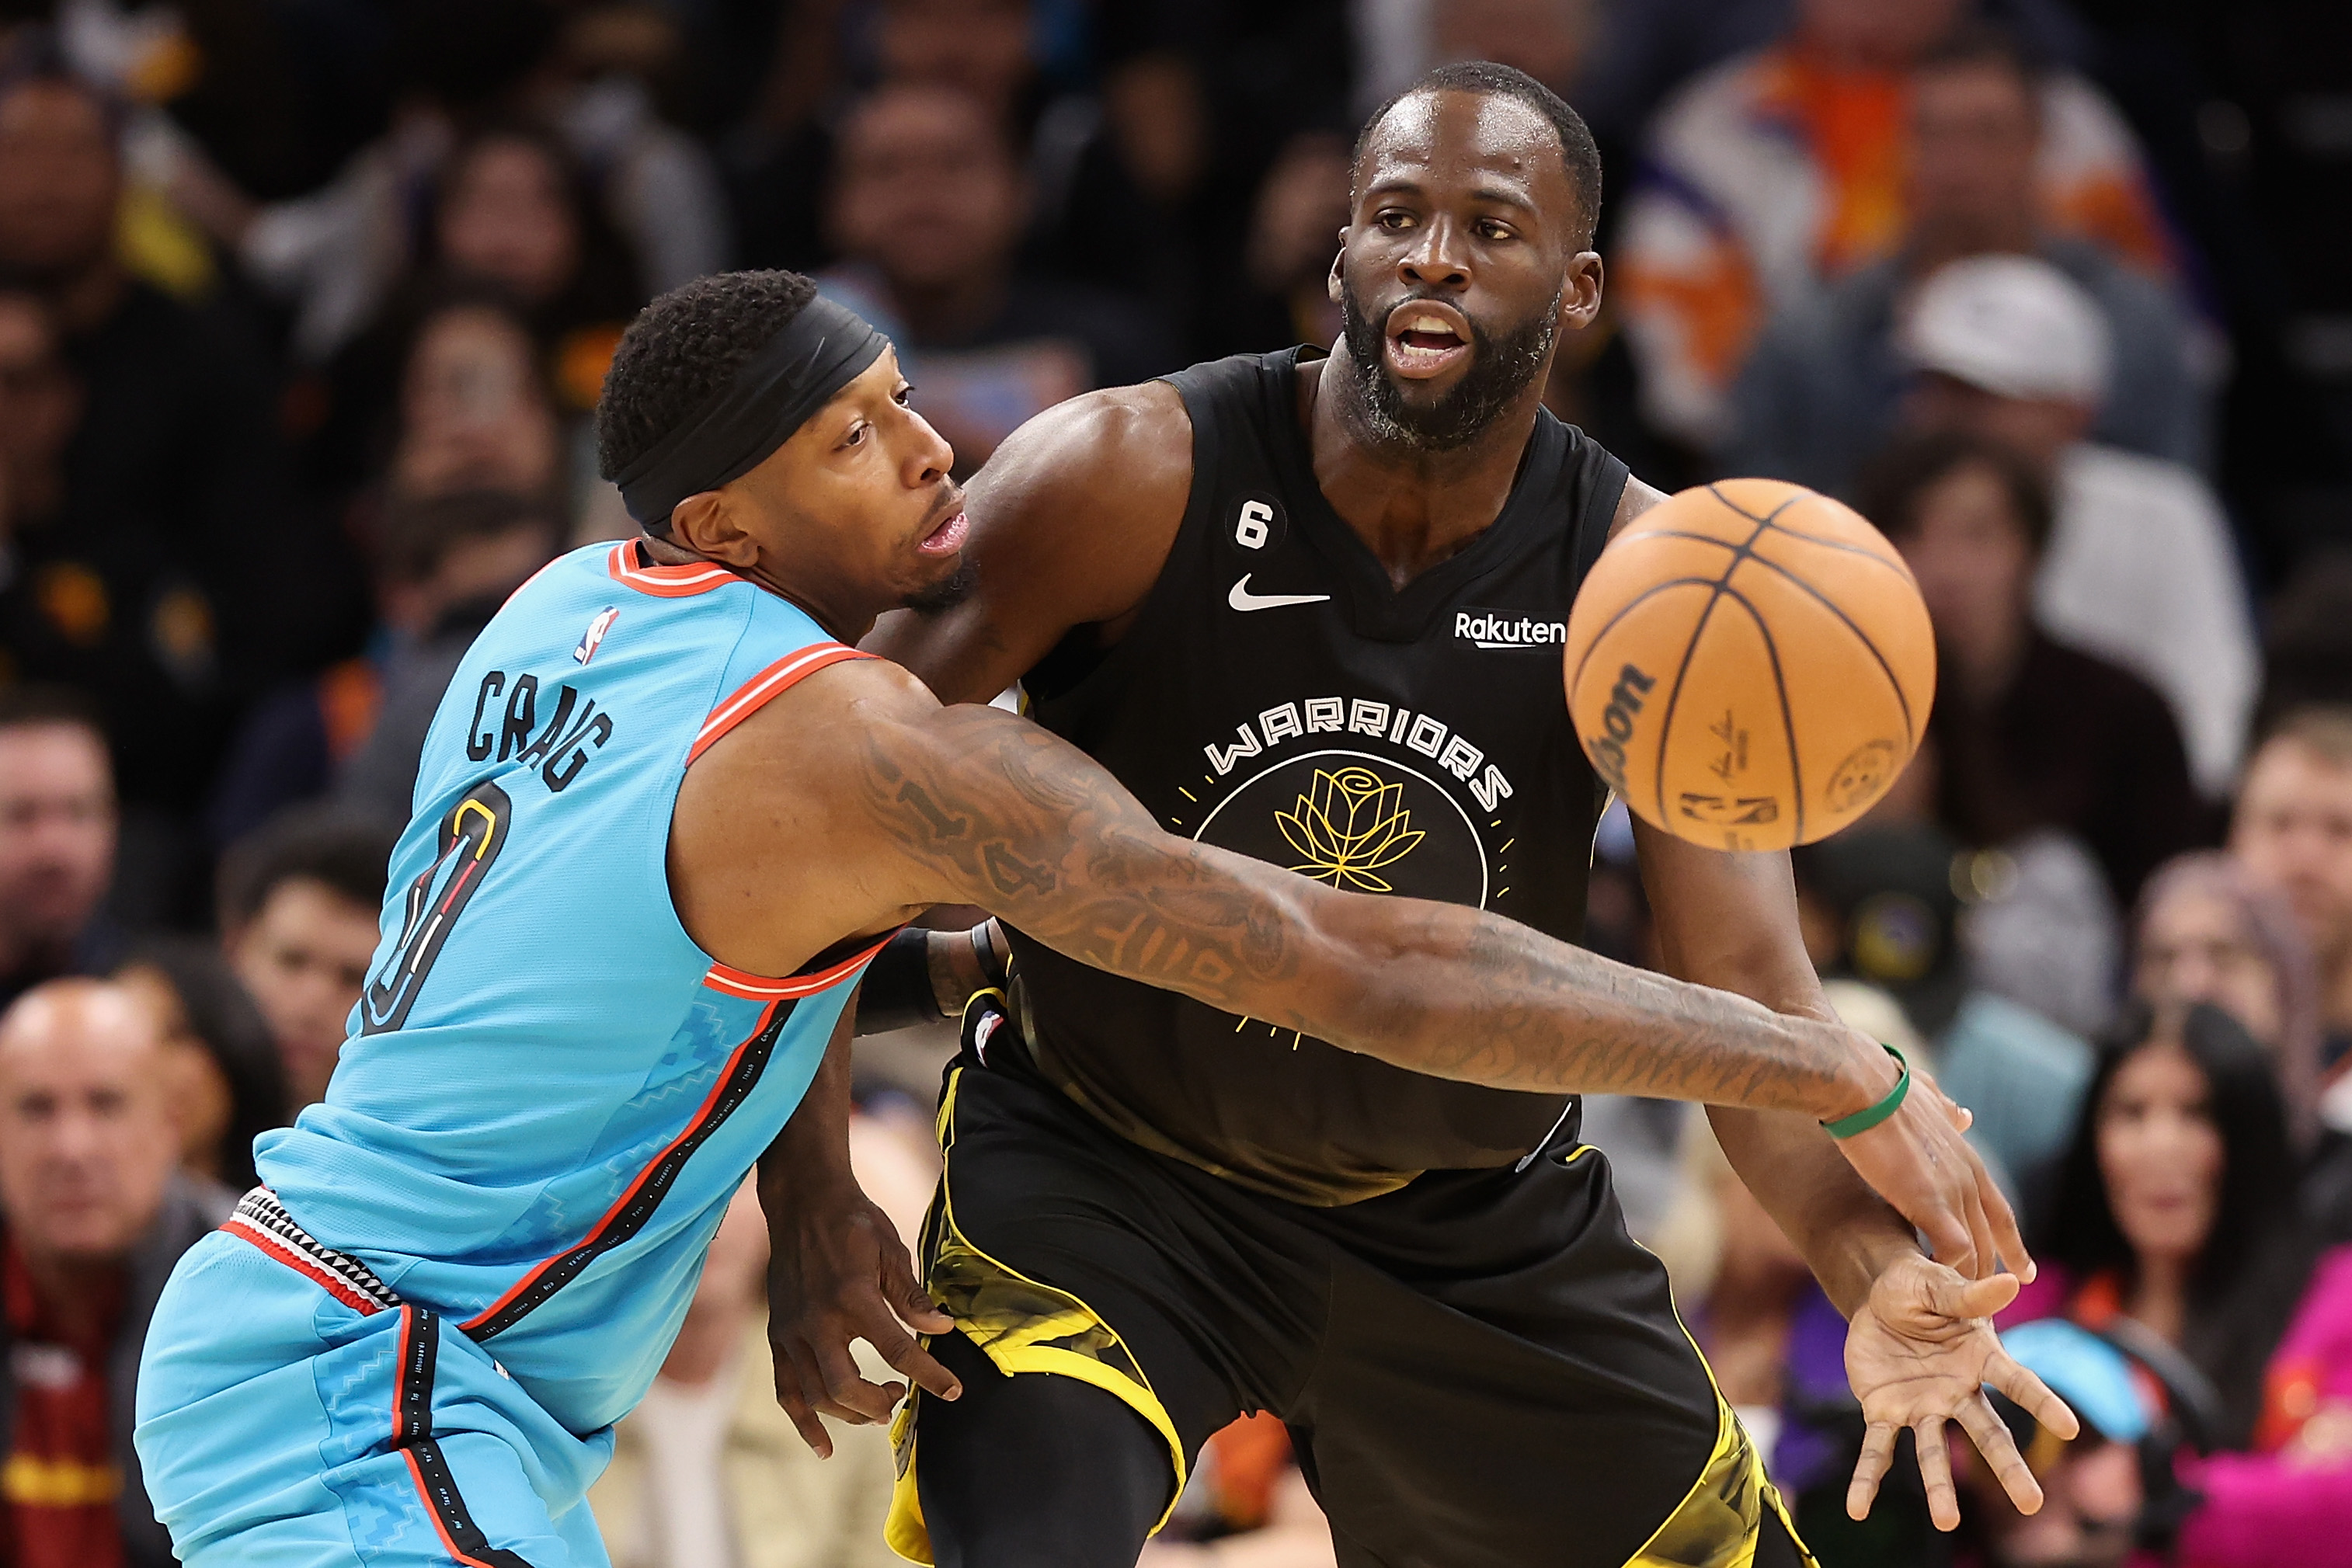 Draymond Green passing the ball while defended by Torrey Craig